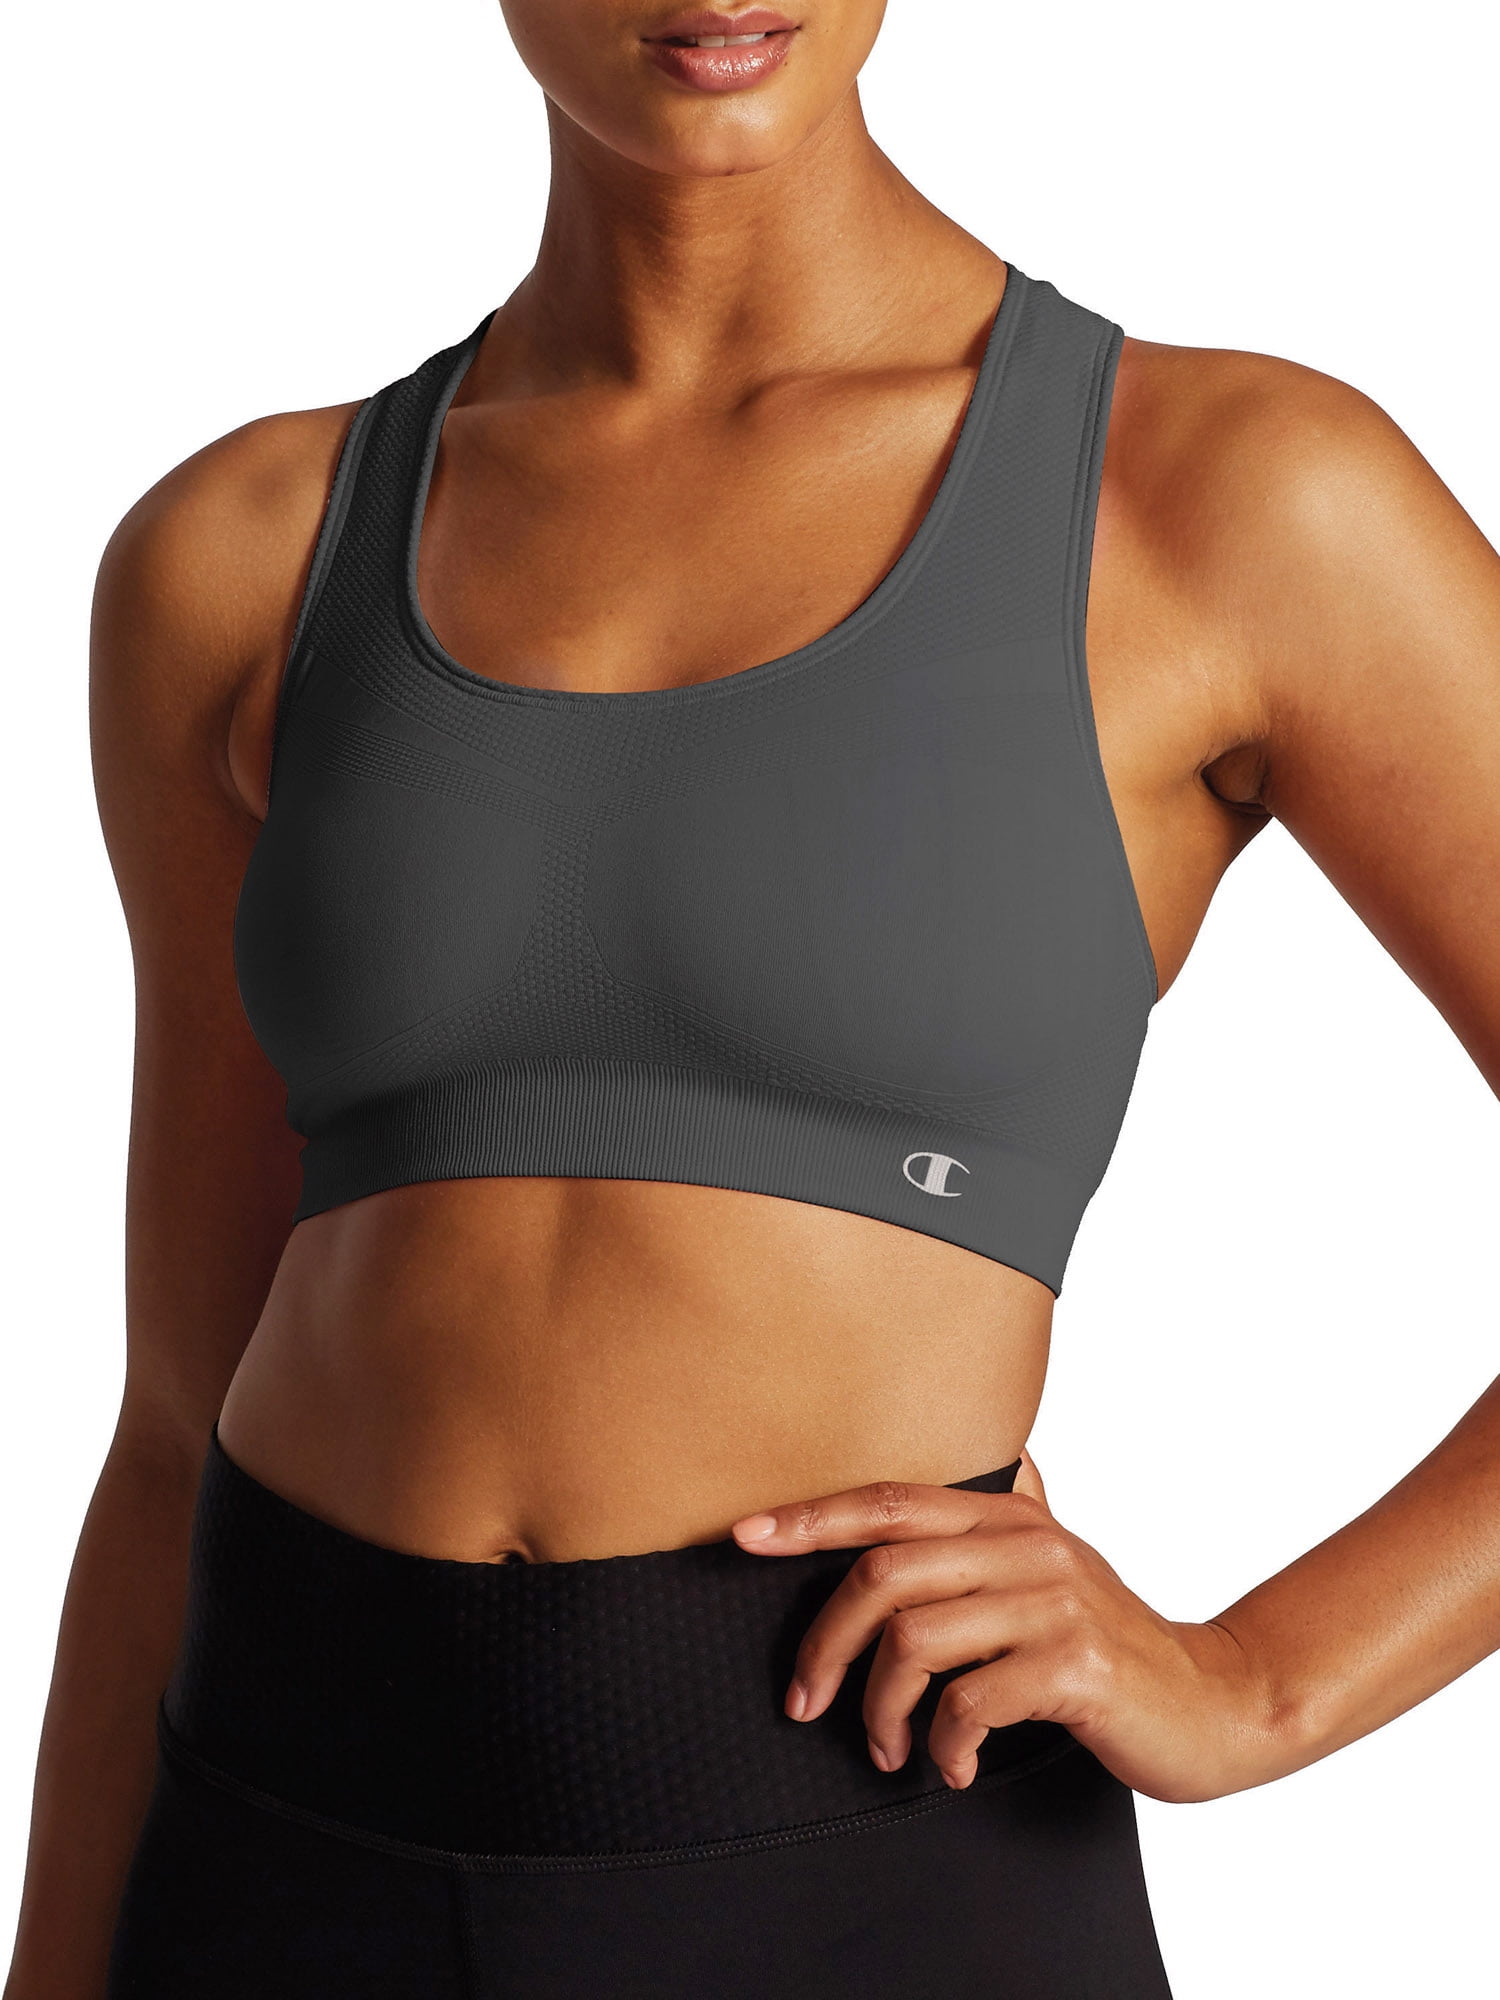 Champion, Infinity Racerback, Moderate Support, Seamless Sports